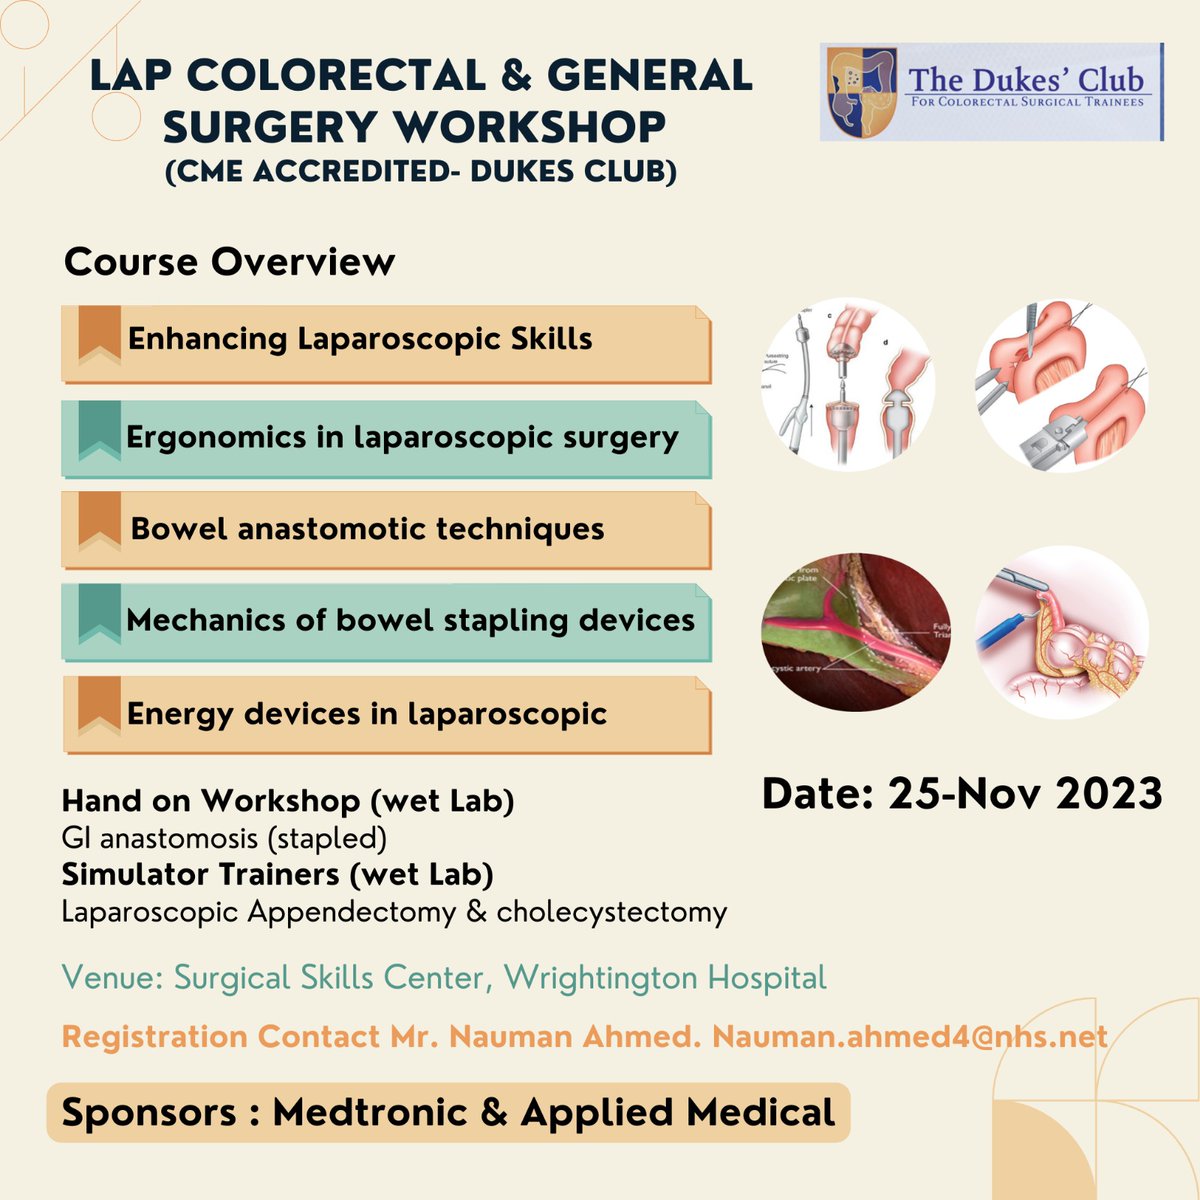 Join us for an intensive Surgical Skills Course in Laparoscopic Colorectal & General Surgery!  Elevate your expertise with hands-on training. Don't miss out!

Limited Seats! Reserve yours now. #SurgicalSkills #DukesClub #MedicalEducation #SurgeryTraining #LaparoscopicSurgery'